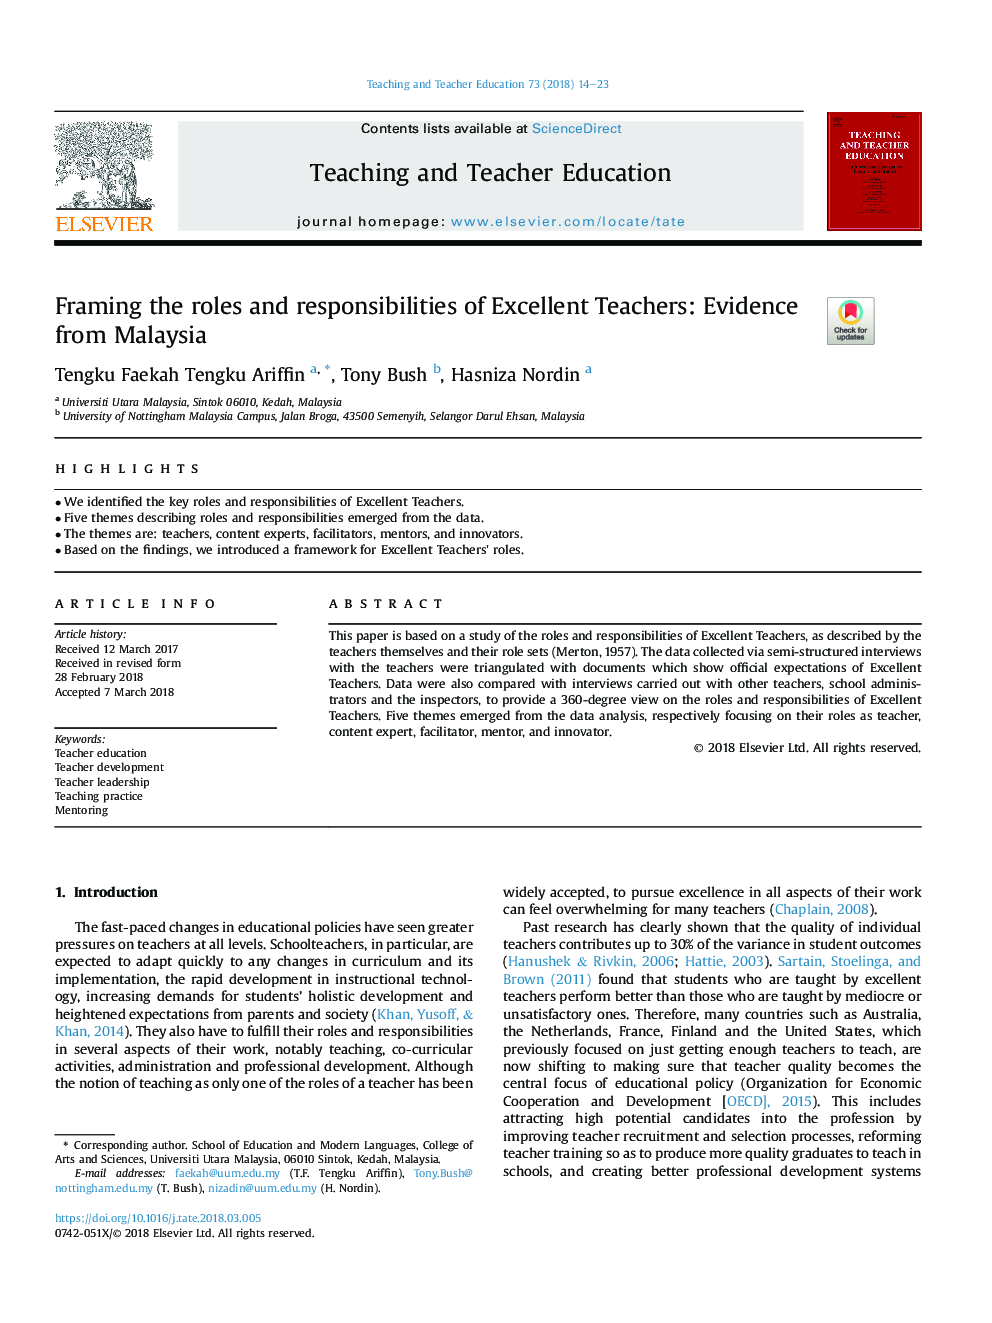 Framing the roles and responsibilities of Excellent Teachers: Evidence from Malaysia